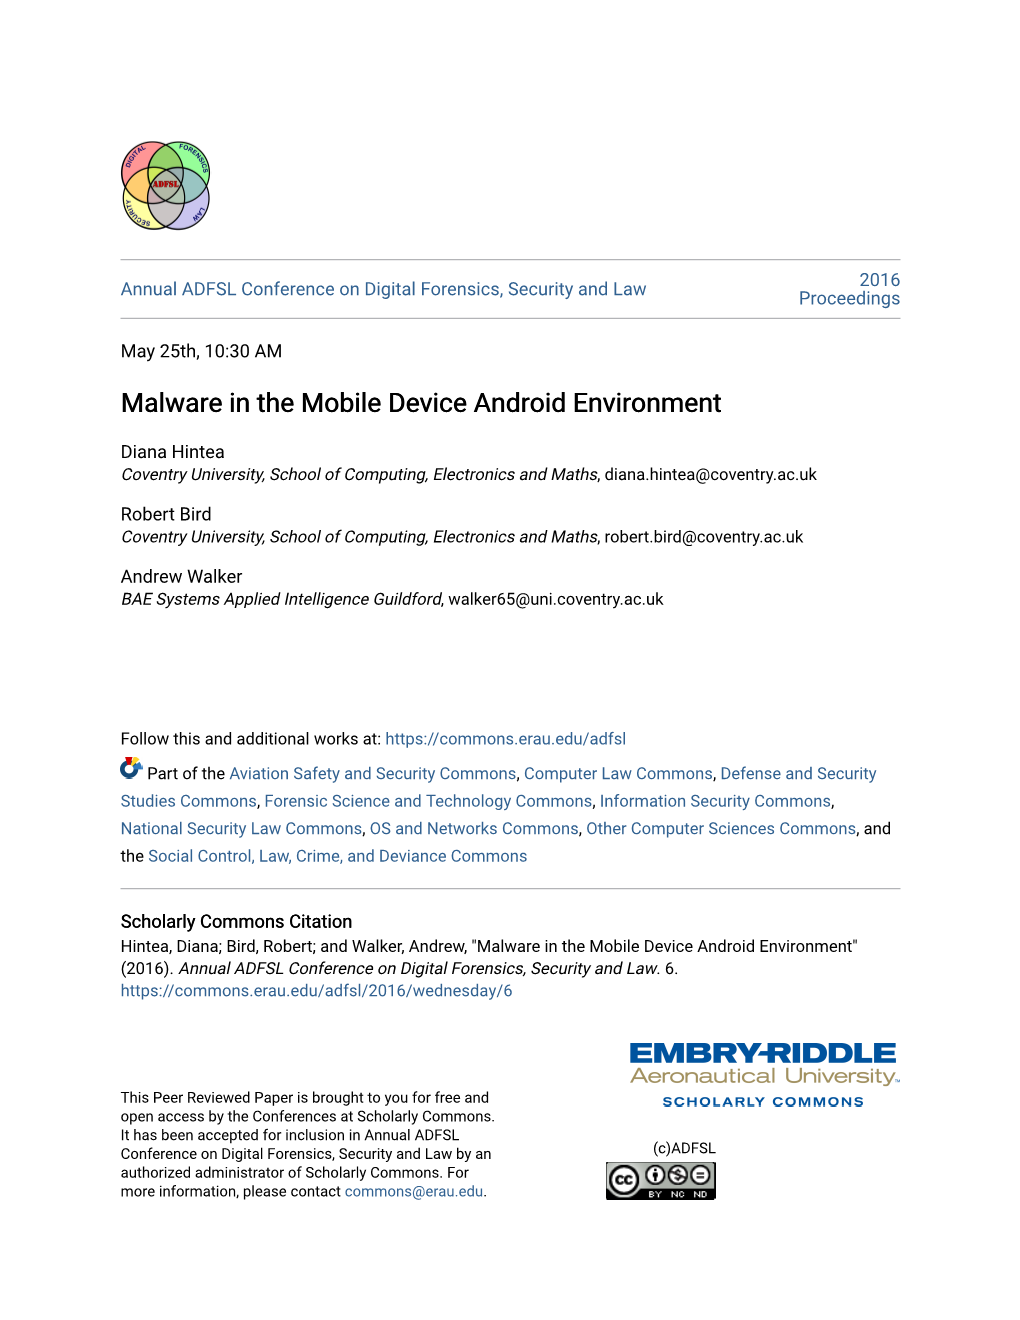 Malware in the Mobile Device Android Environment